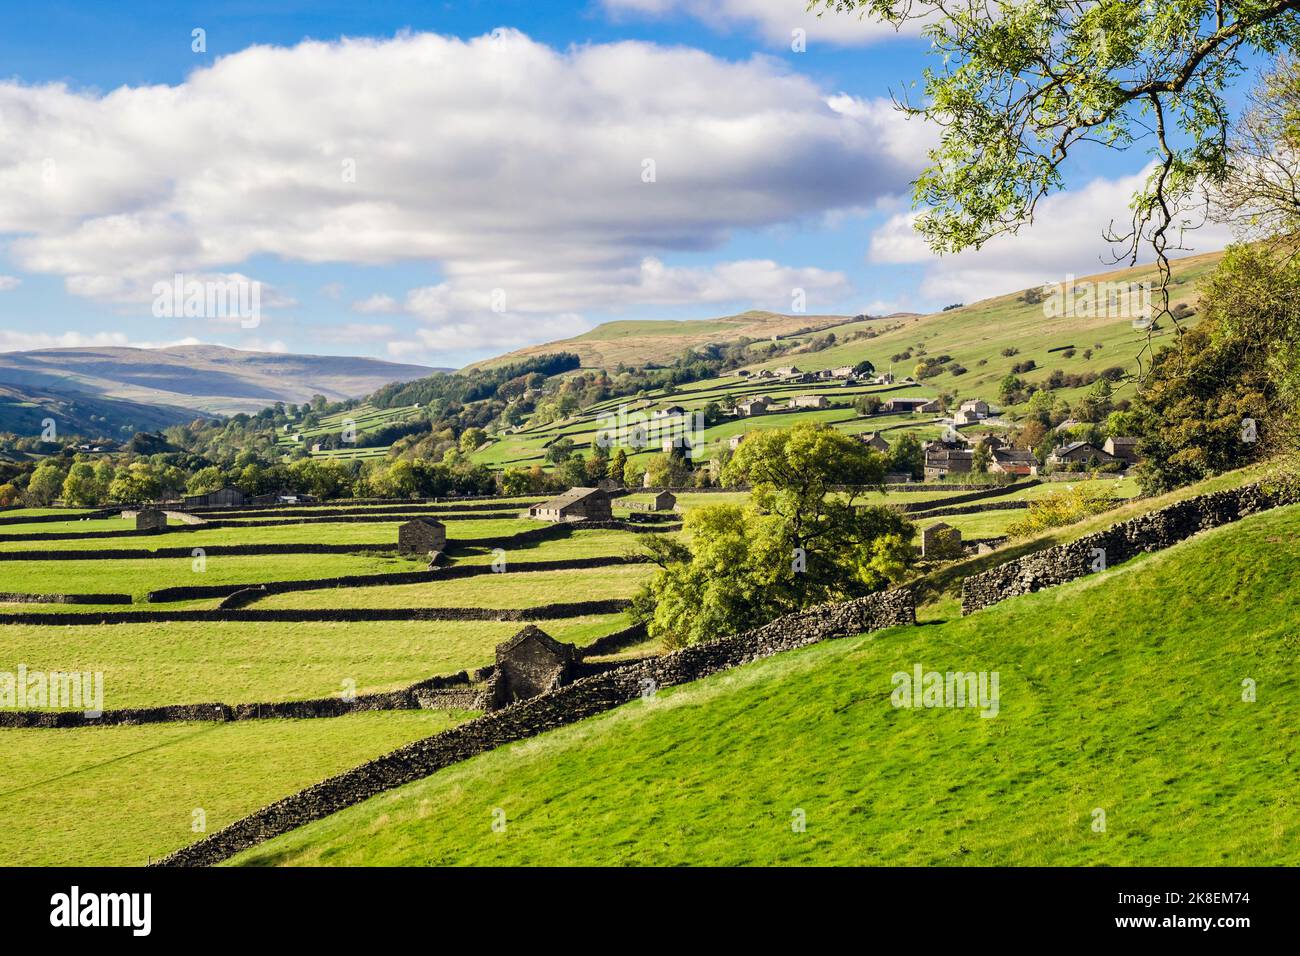 View to village across countryside with barns and drystone walls in Yorkshire Dales National Park. Gunnerside, Swaledale, north Yorkshire, England, UK Stock Photo